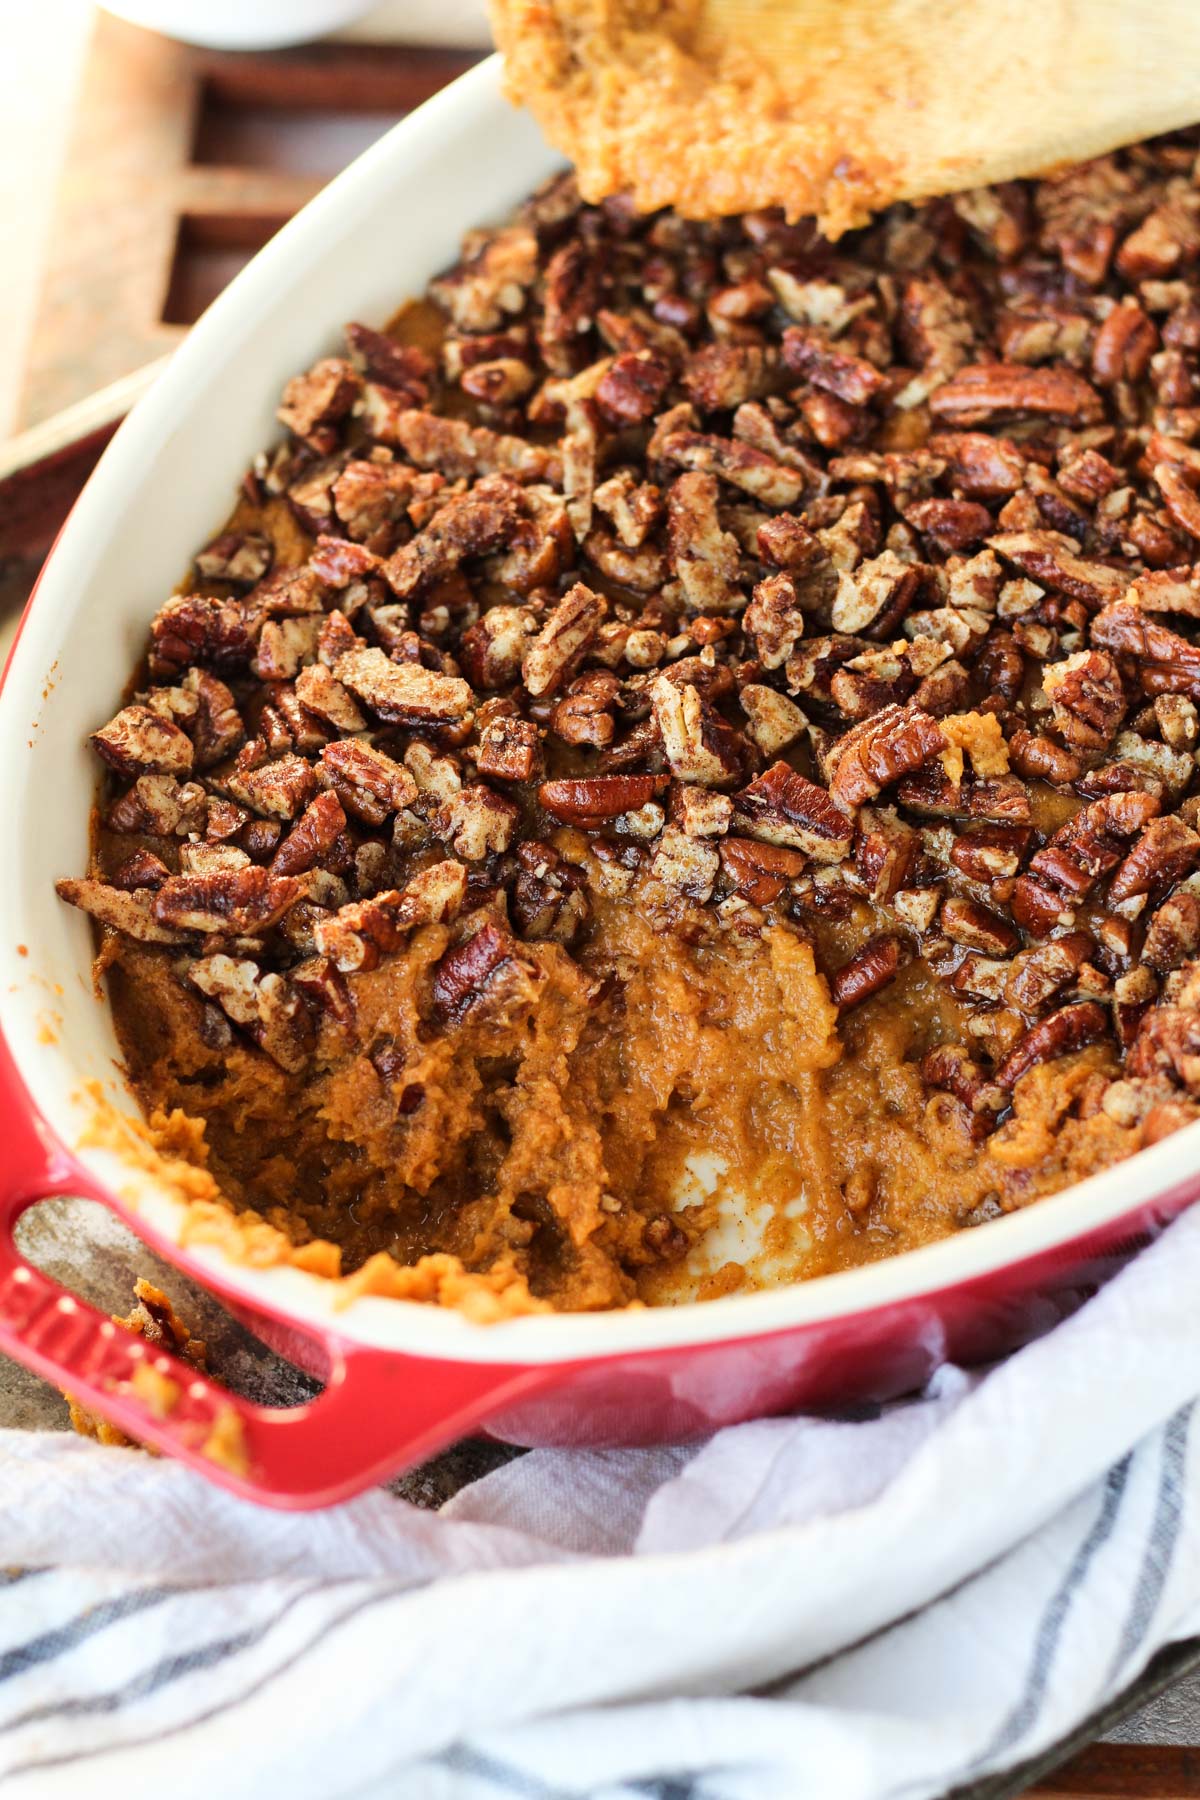 Sweet potato casserole with some scooped out.